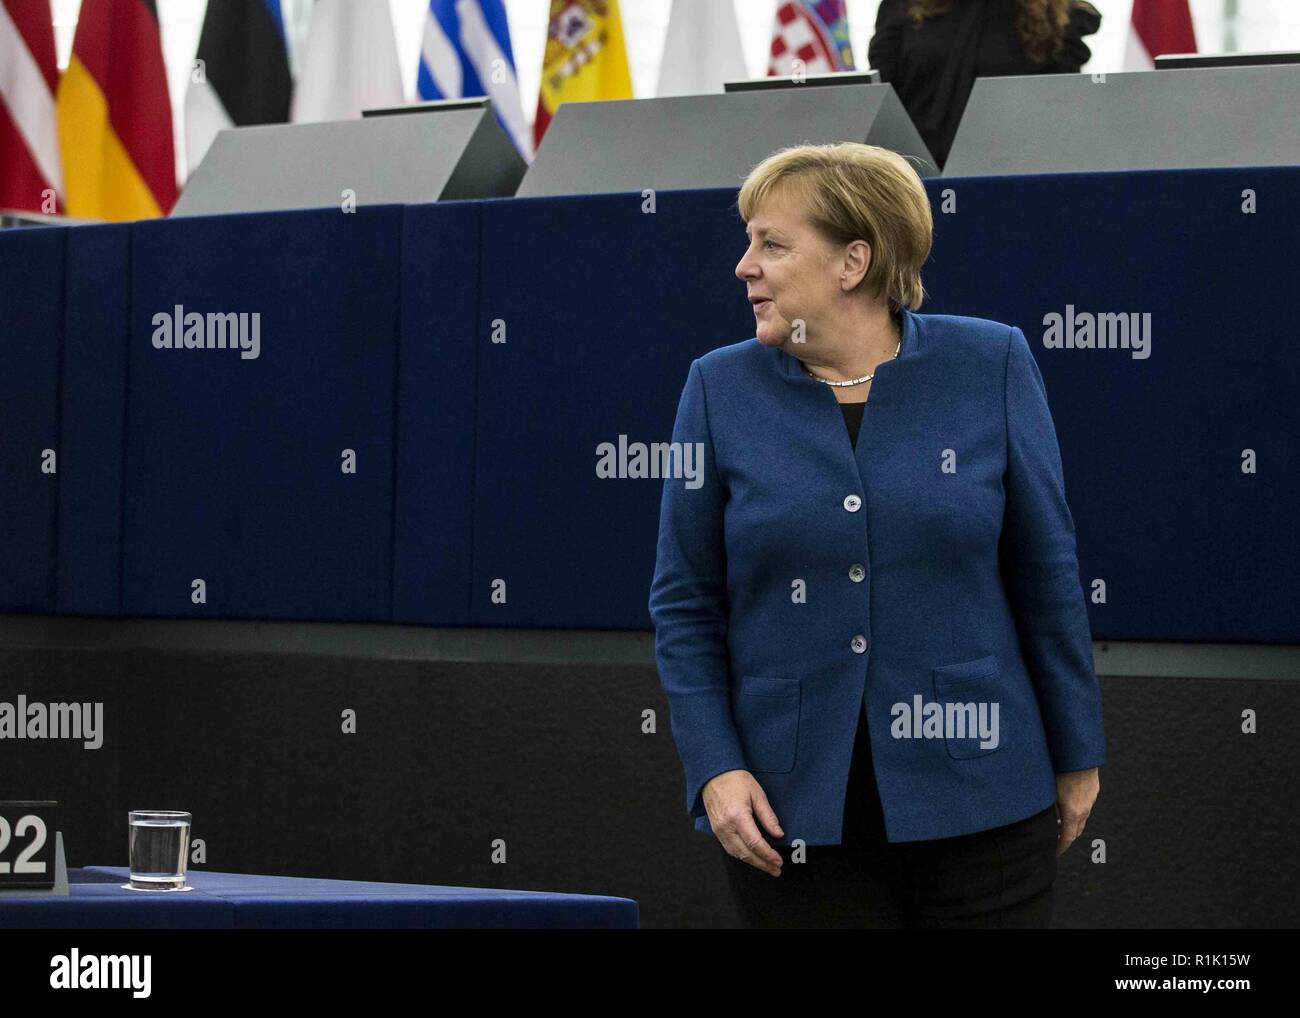 Strasbourg, France. 13th November, 2018. German Chancellor Angela Merkel seen at the debate about the future of Europe with the members of the European Parliament, in Strasbourg, eastern France. Credit: Elyxandro Cegarra/SOPA Images/ZUMA Wire/Alamy Live News Stock Photo